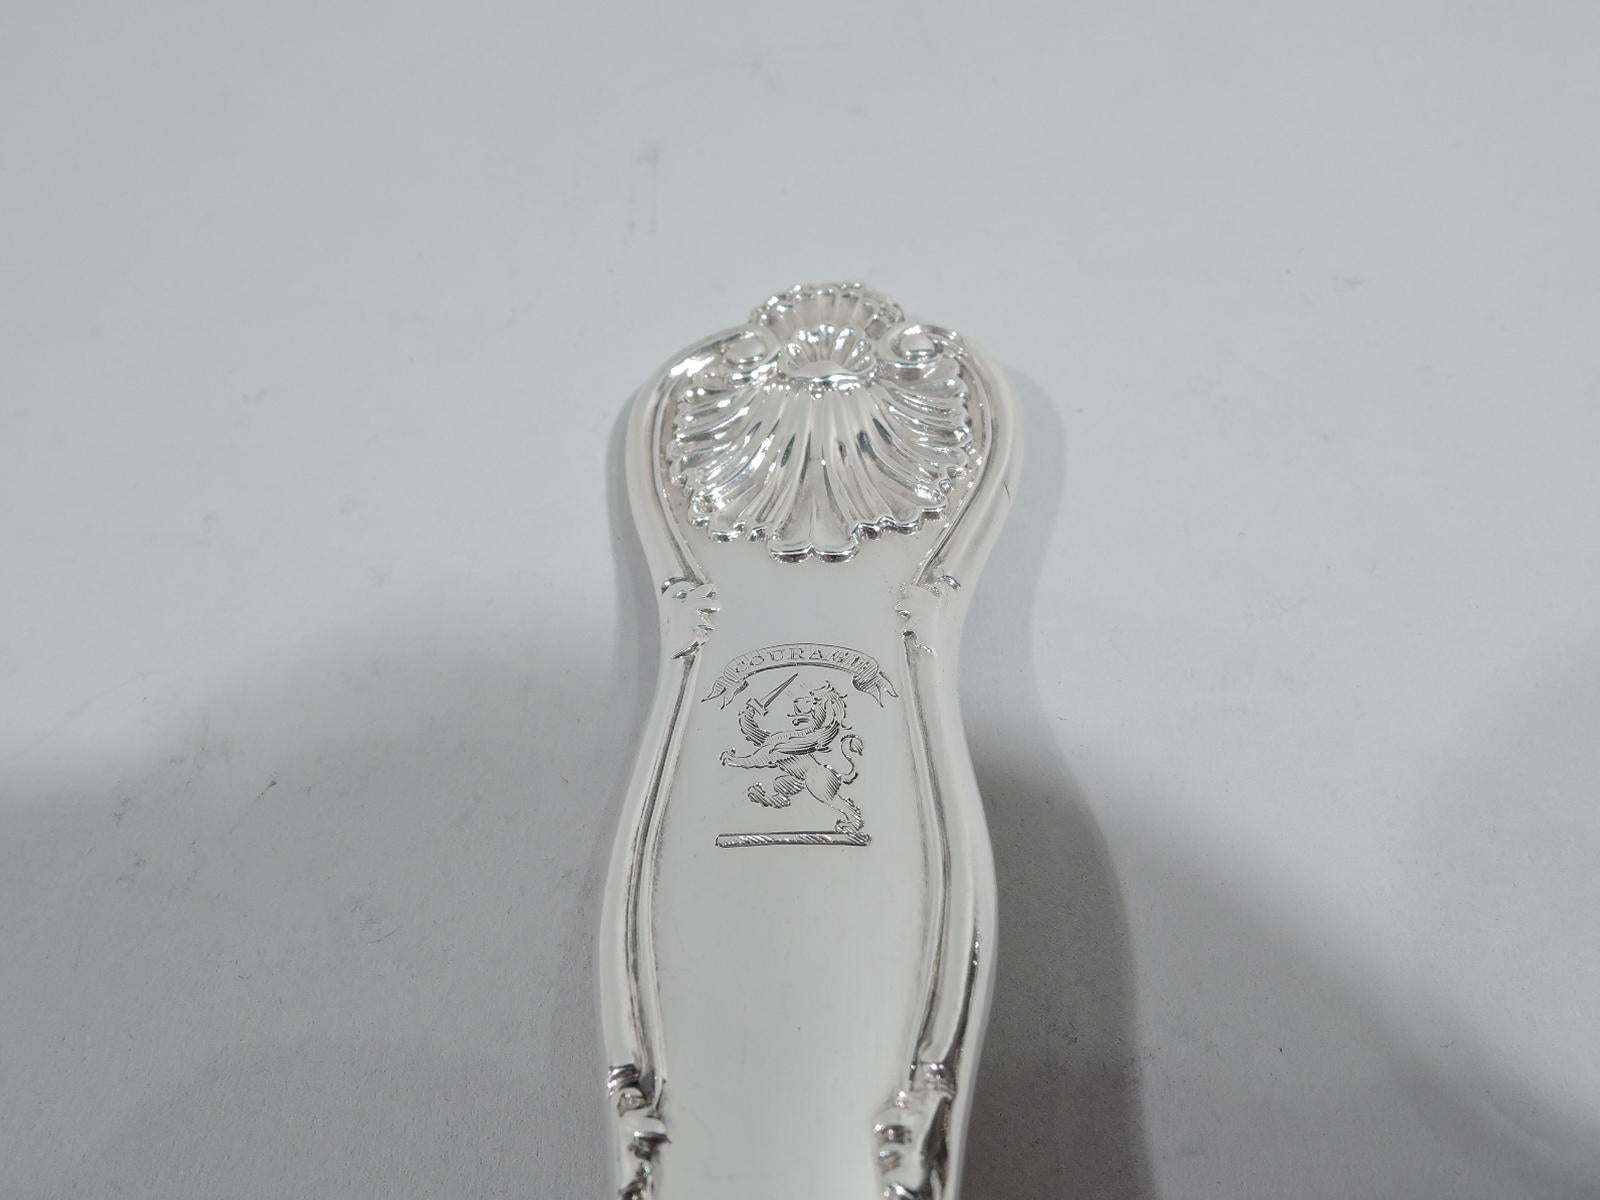 Victorian Georgian Queen sterling silver soup ladle. Made by John and Henry Lias in London in 1839. King-shaped handle has engraved armorial with sword-bearing lion rampant and motto “Courage”. Deep ovoid bowl. A substantial and traditional piece